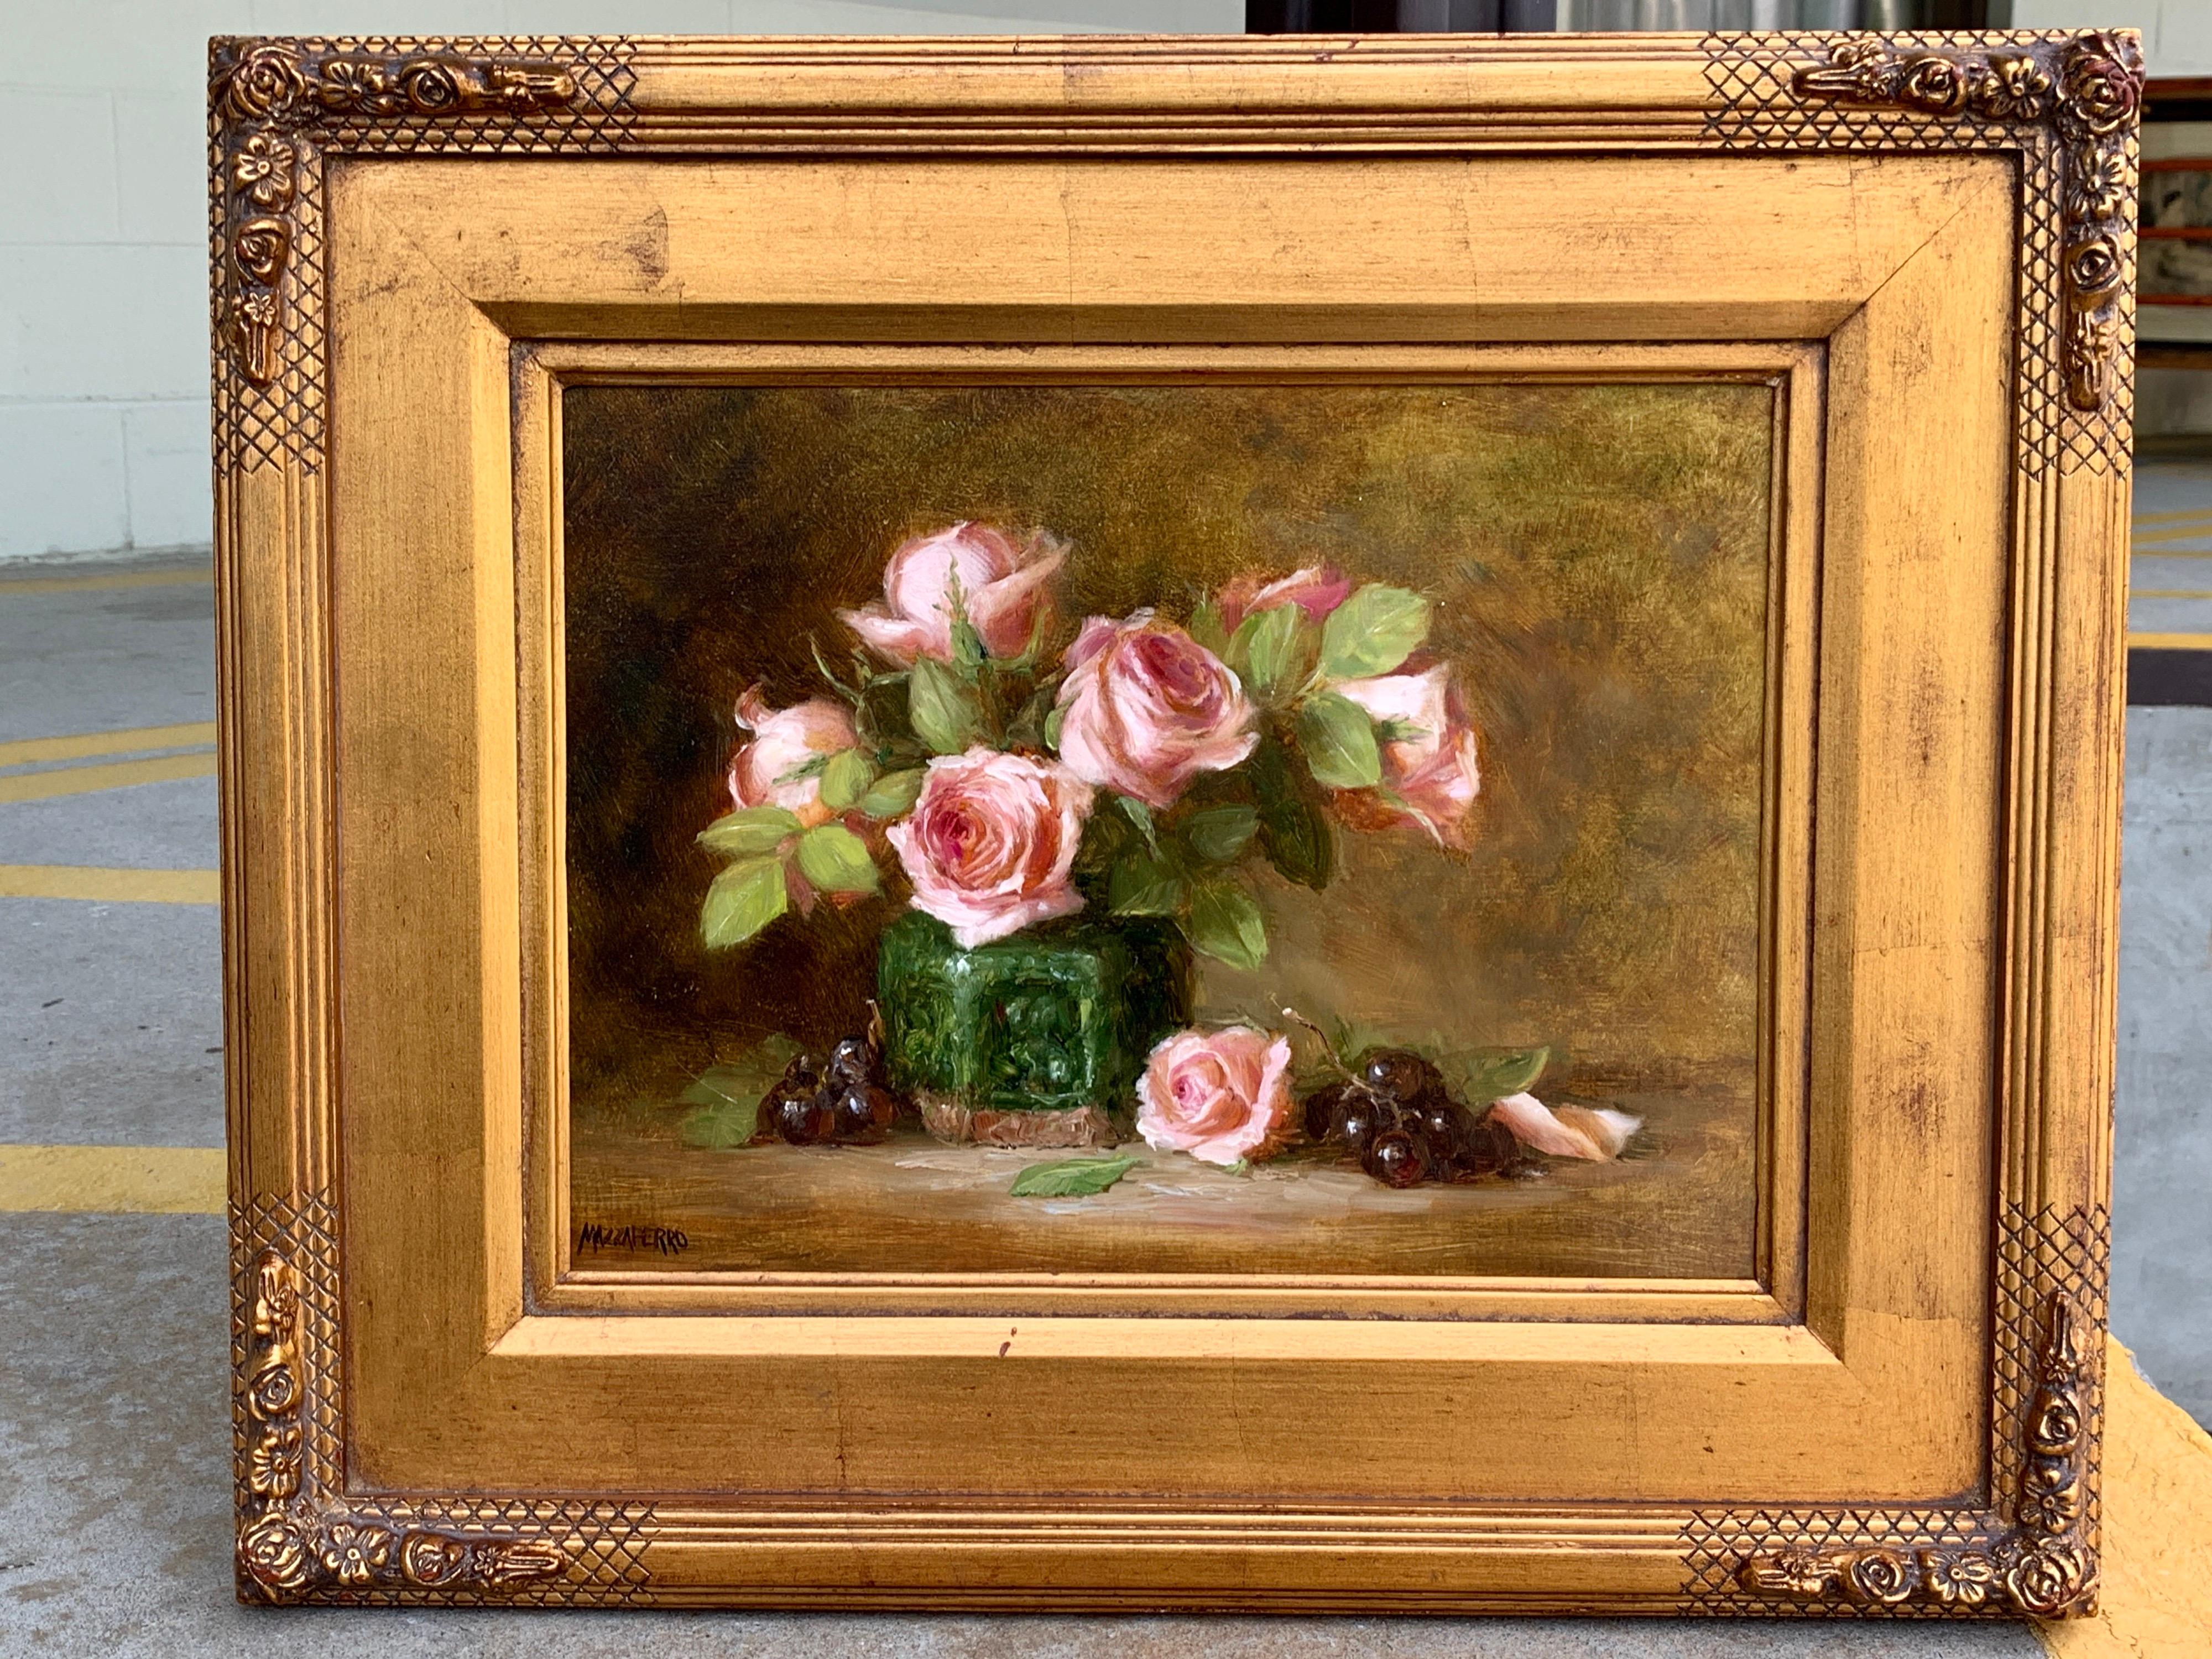 Roses in a Green Chinese Export Jar, Still Life
Lucy Mazzaferro, Mississippi, USA
Contemporary Artist 
Oil on Board 12